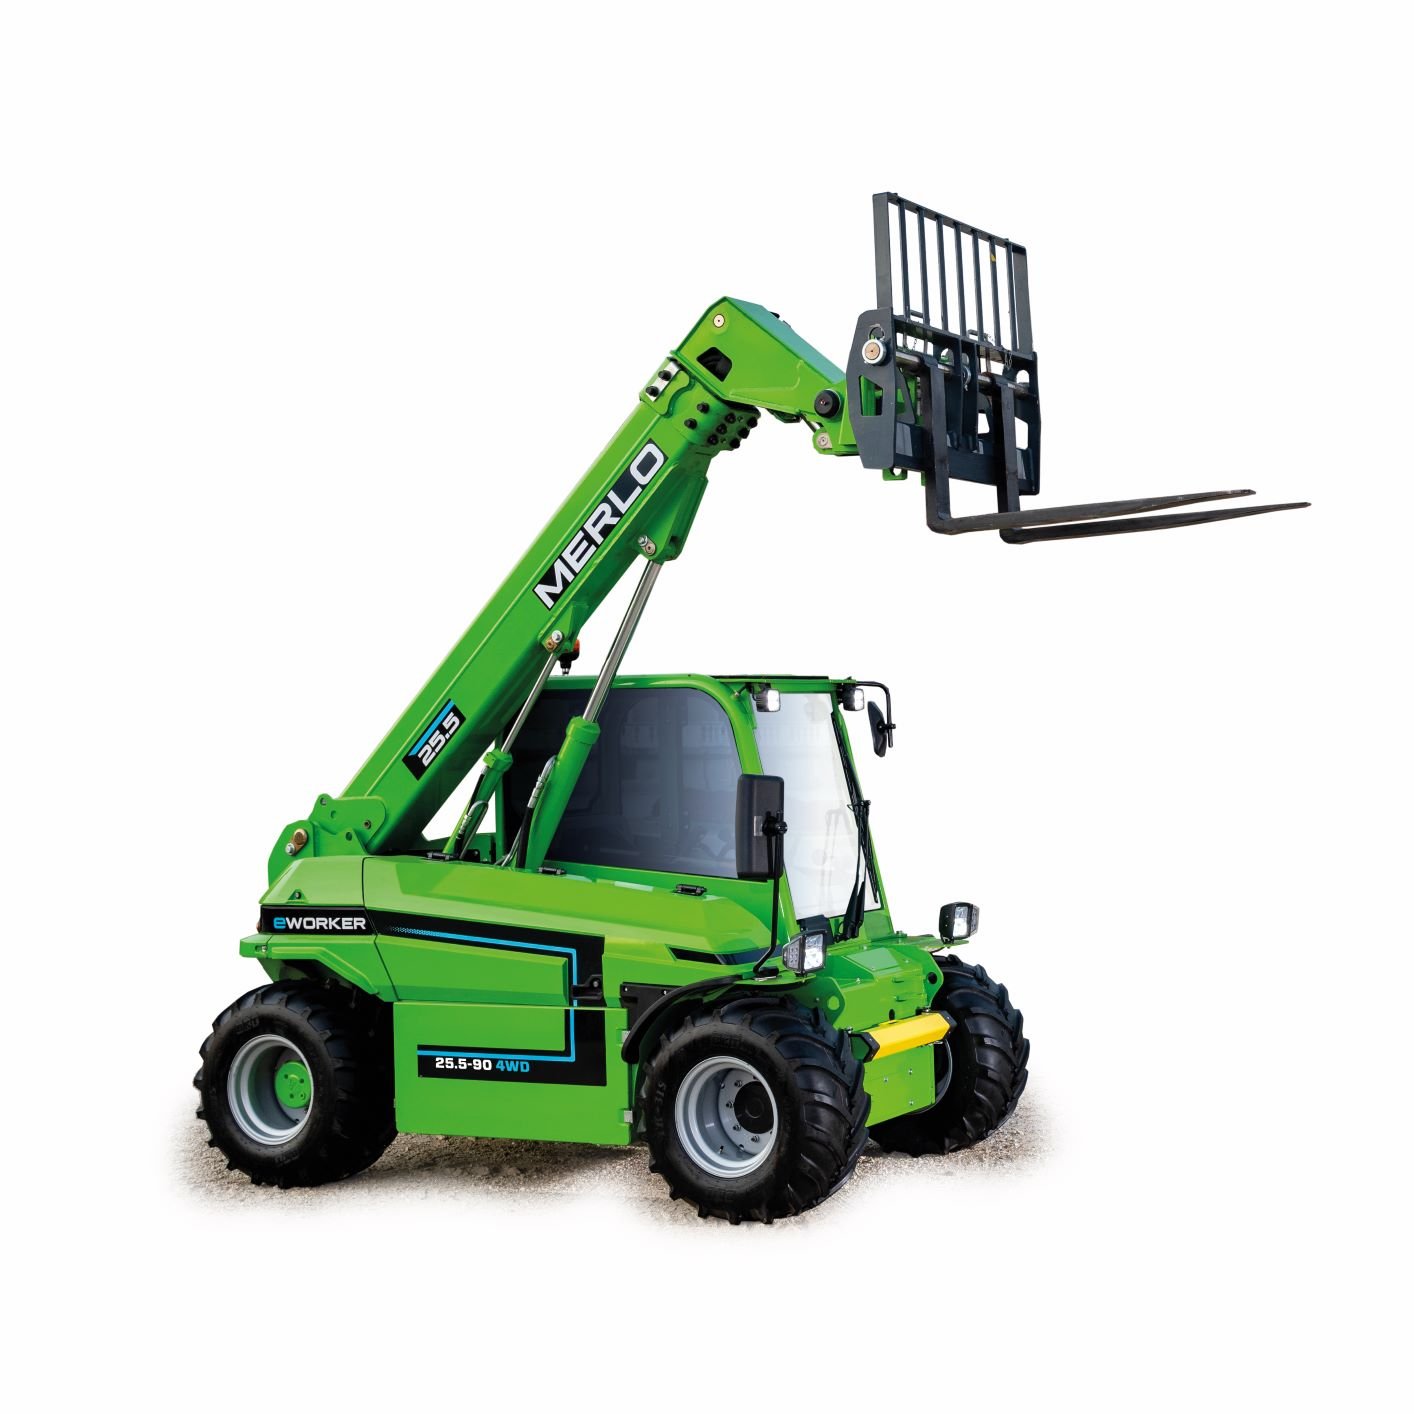 The Merlo eWorker 25.5 90 electric telehandler. With floating pallet forks attached. Cut out image, no background